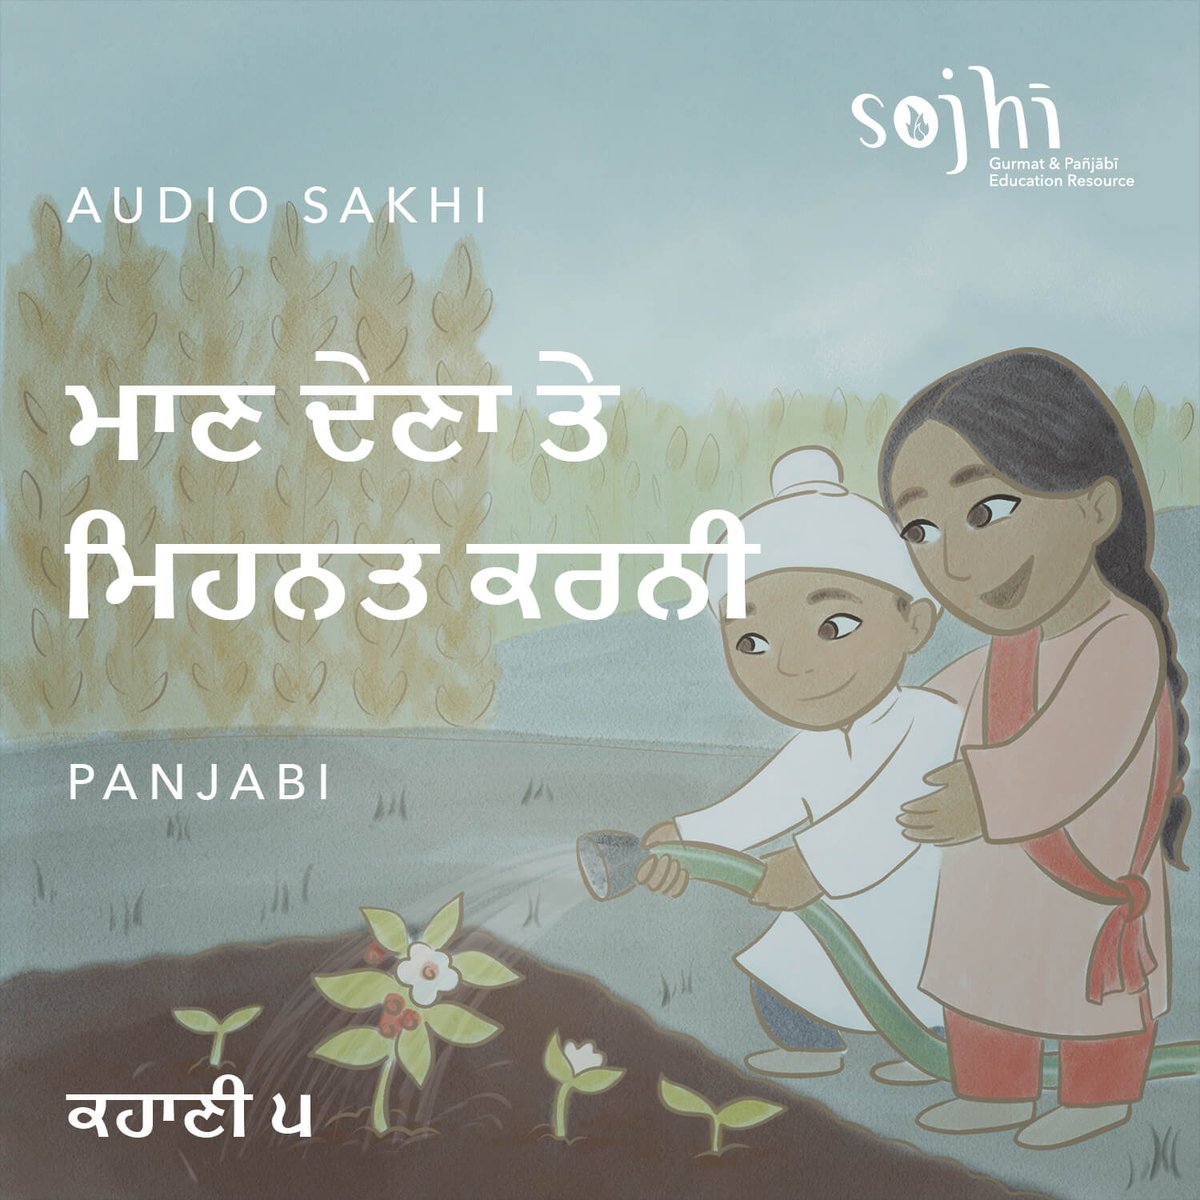 Follow Tandeep Kaur as she delves into the sakhis in Panjabi, the stories from the Gurus' lives. This episode unfolds on a cold, rainy day in Kartarpur, where the downpour was so intense that it tore down a wall in Guru Nanak Sahib’s home. Without hesitation, Bhai Lehna Ji